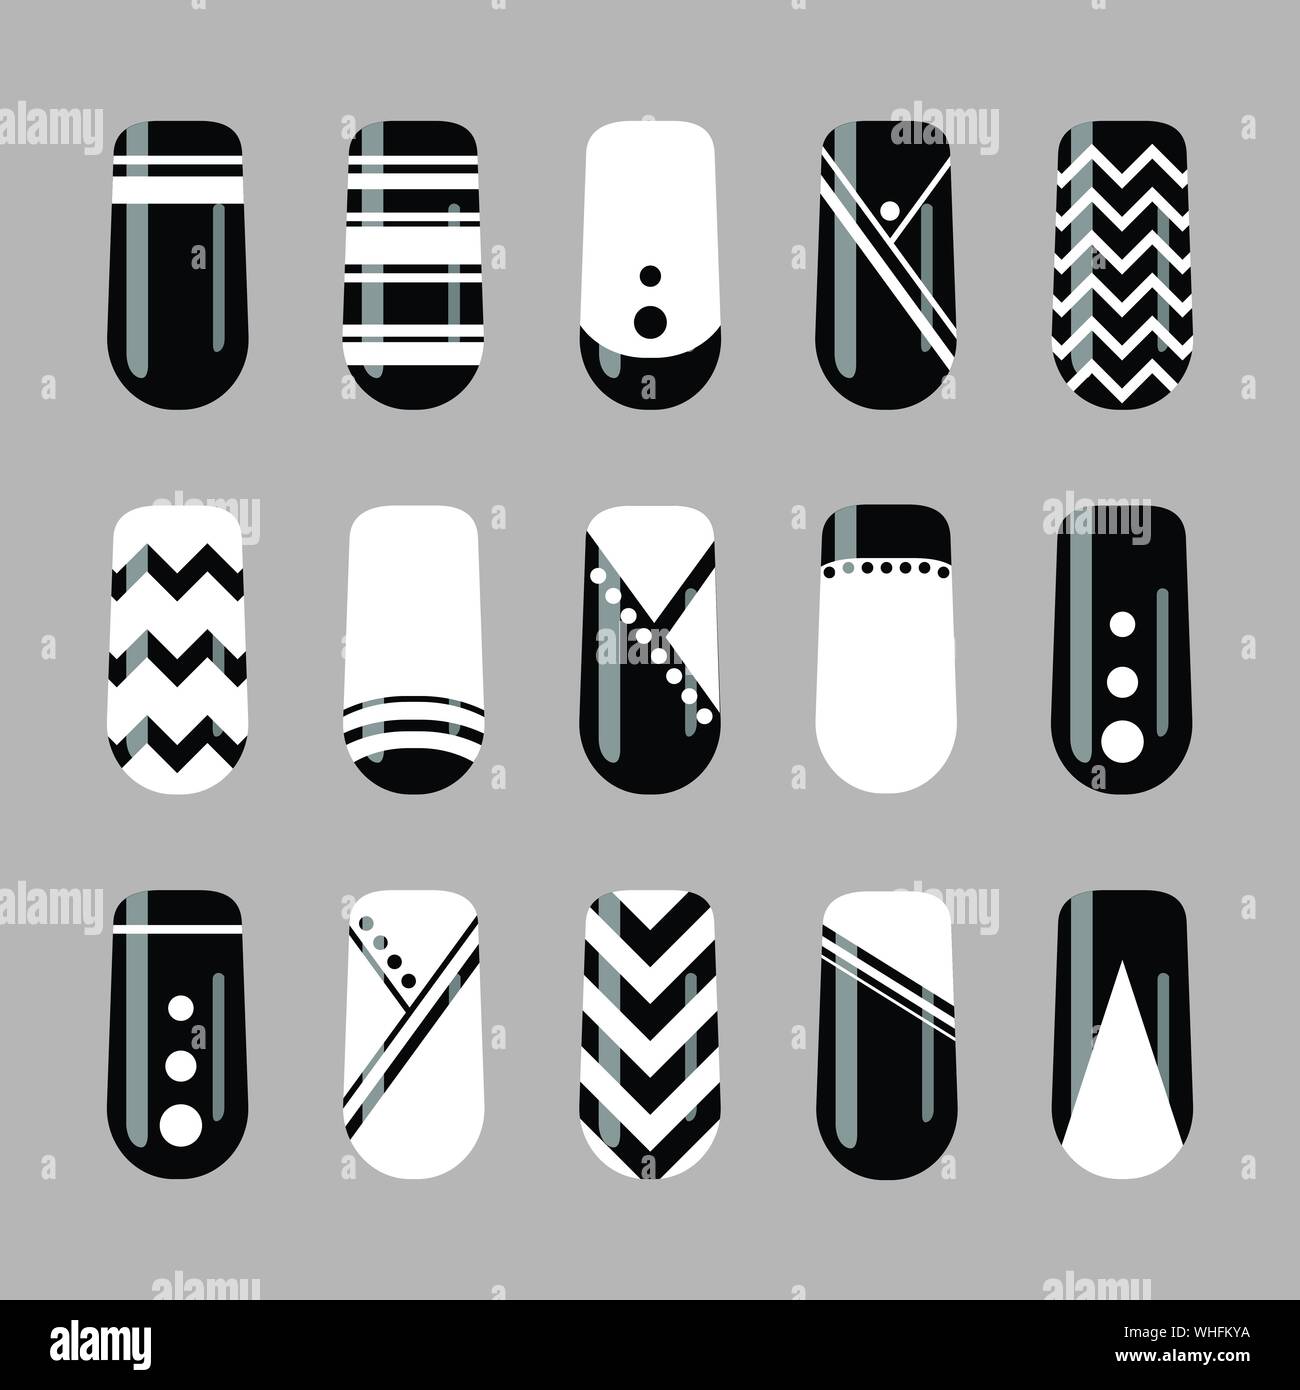 Nail art design. Vector set of black and white geometric nails template Stock Vector